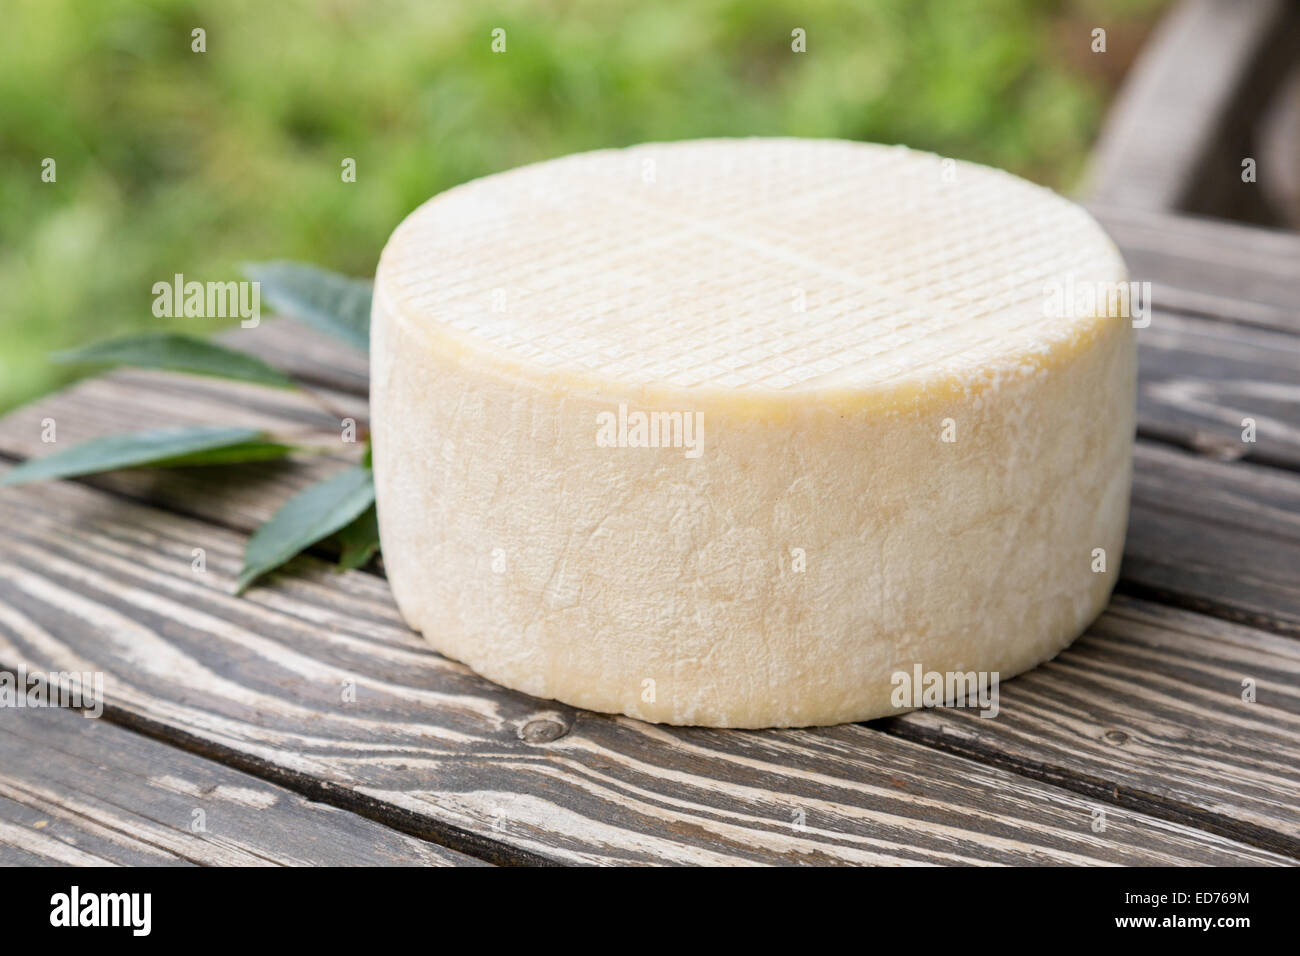 Big head of goat cheese lying on a wooden table boards Stock Photo